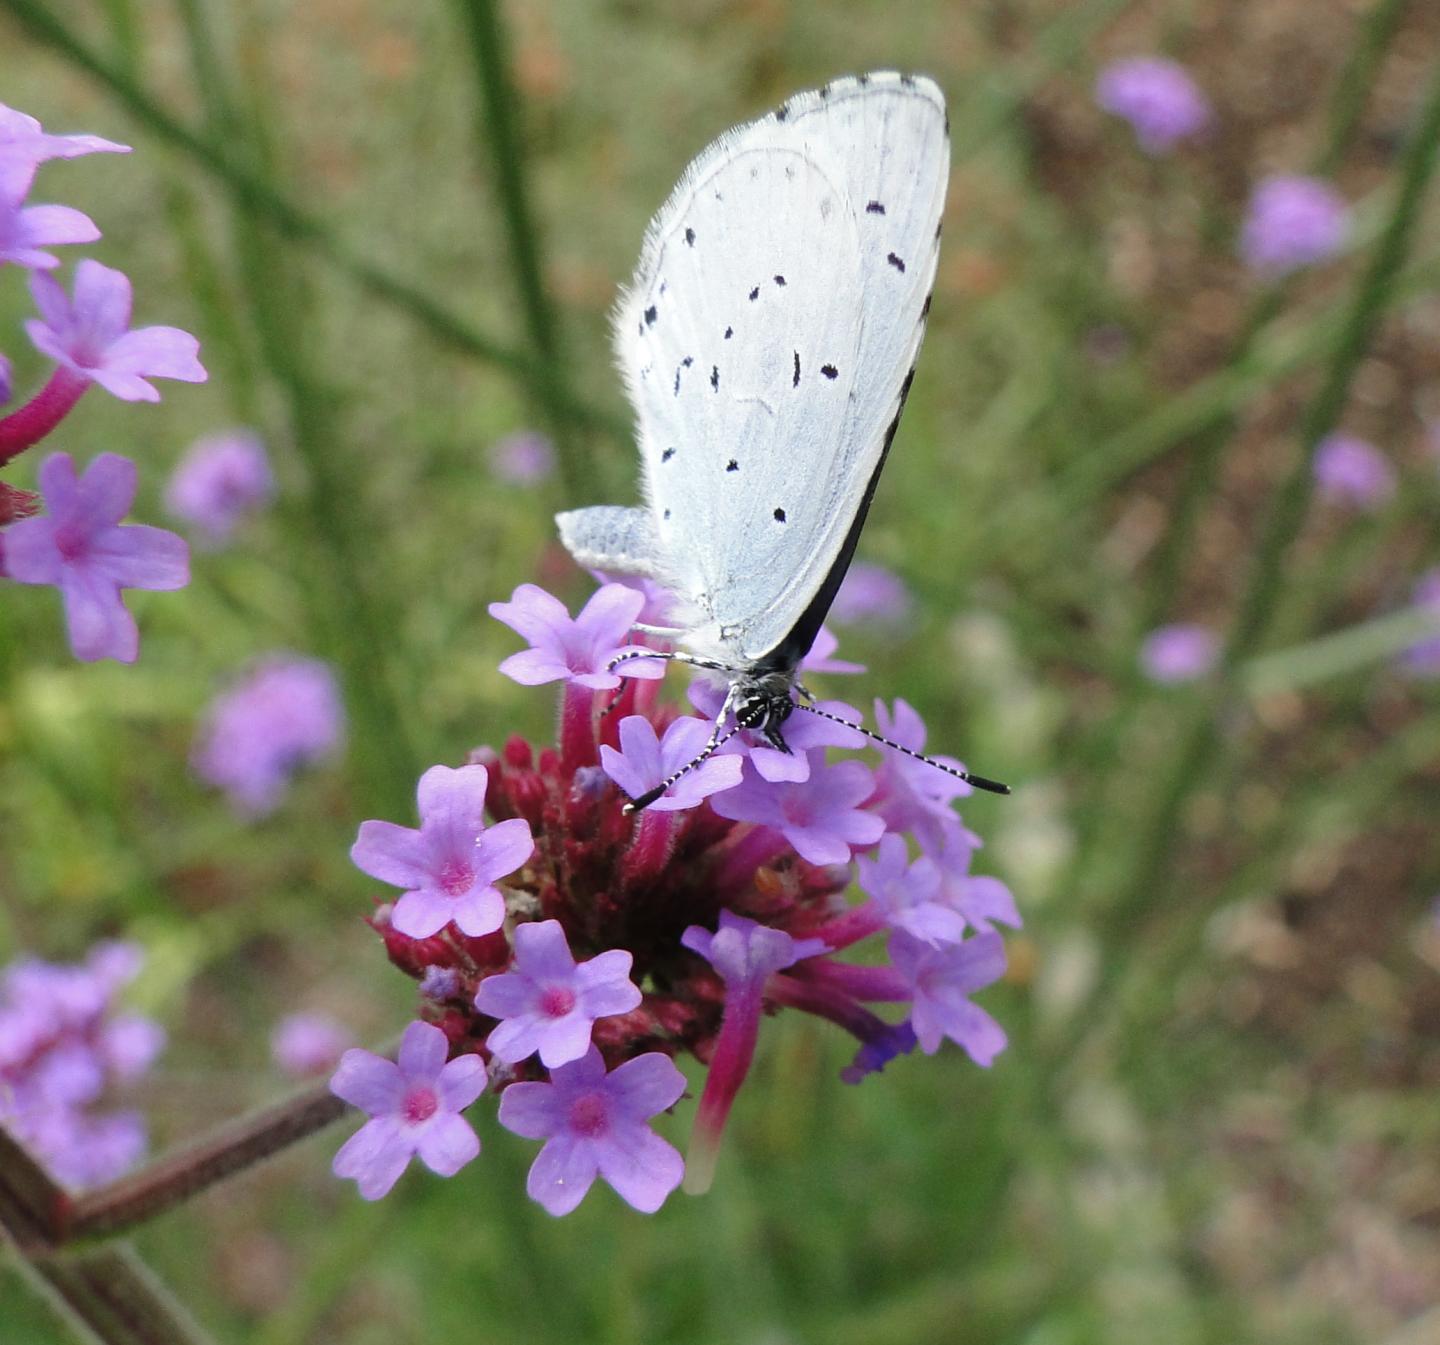 The Holly Blue Butterfly on the Non-Native Plant Verbena Bonariensis (Argentinian Vervain)